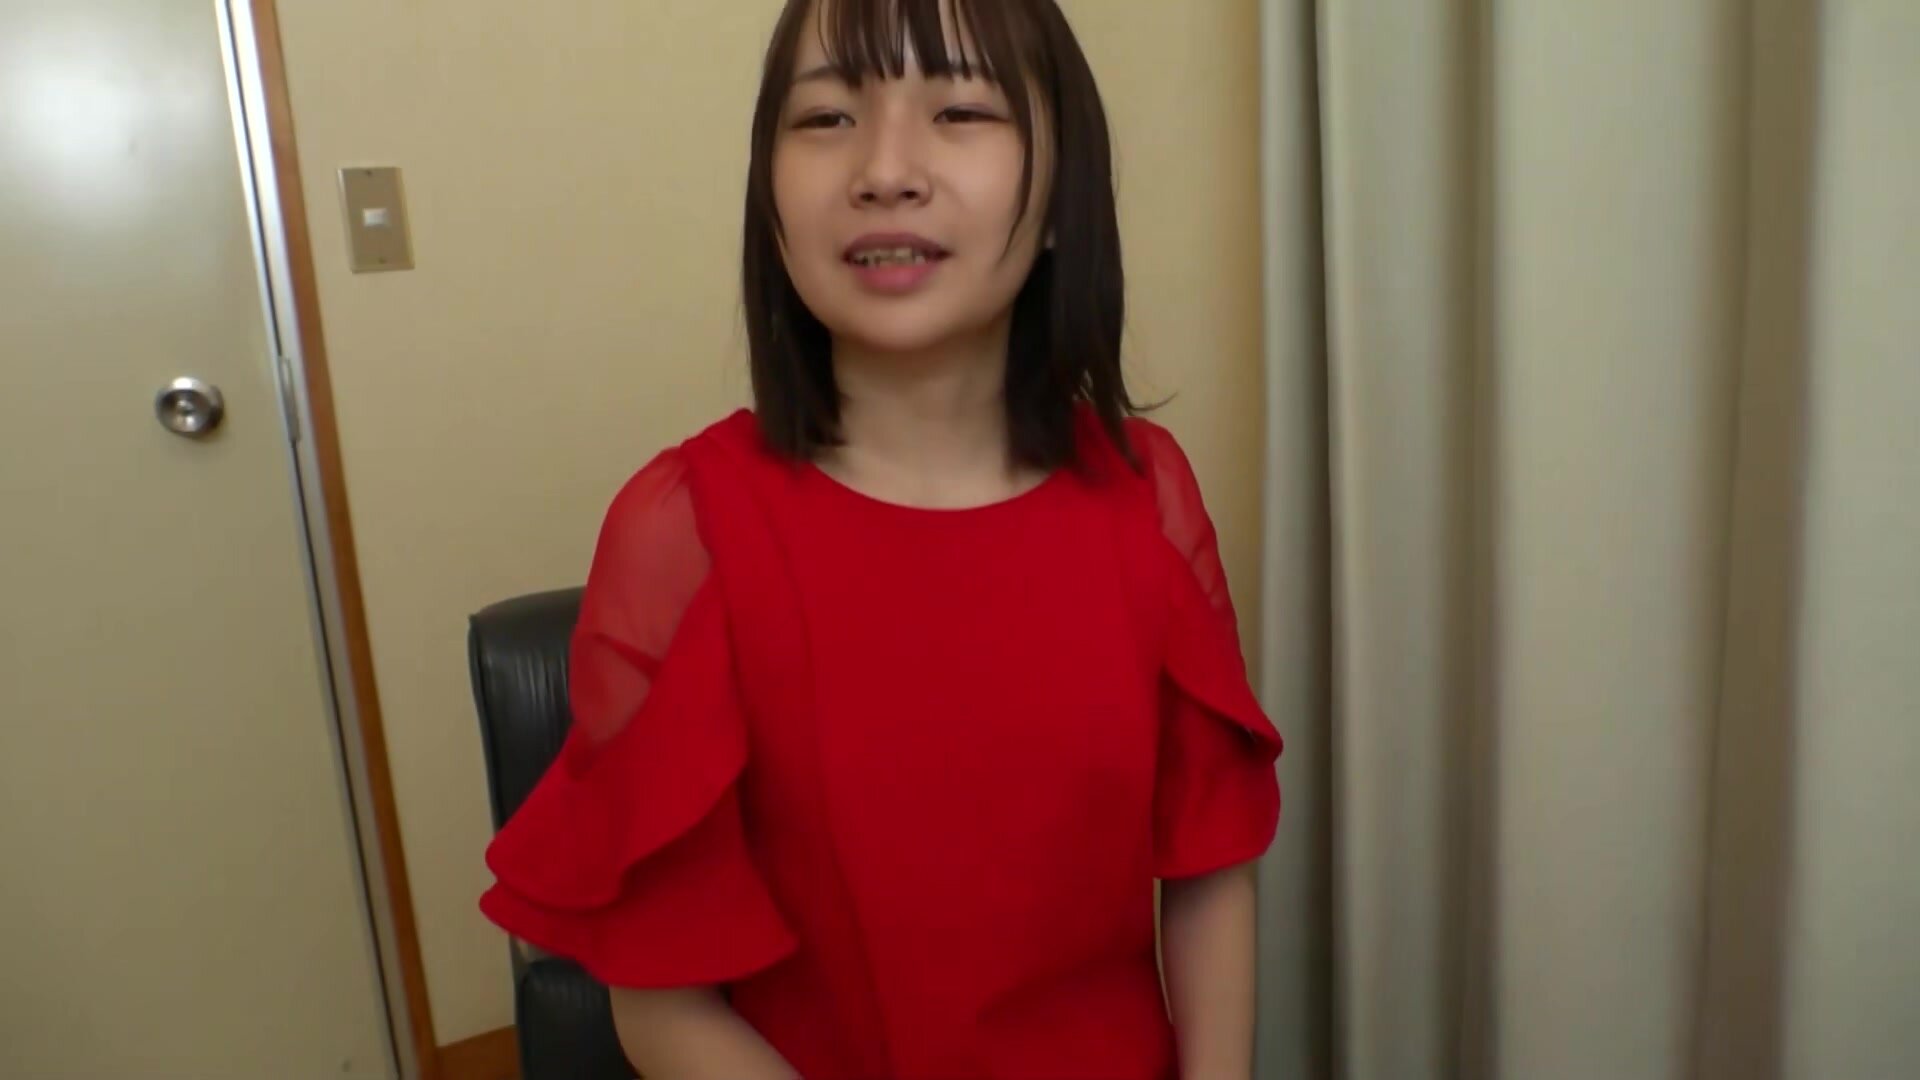 BANK-167 Compliant Beautiful Wife, Plain And Petite Slender Baby-faced Wife Mayu, 27 Years Old